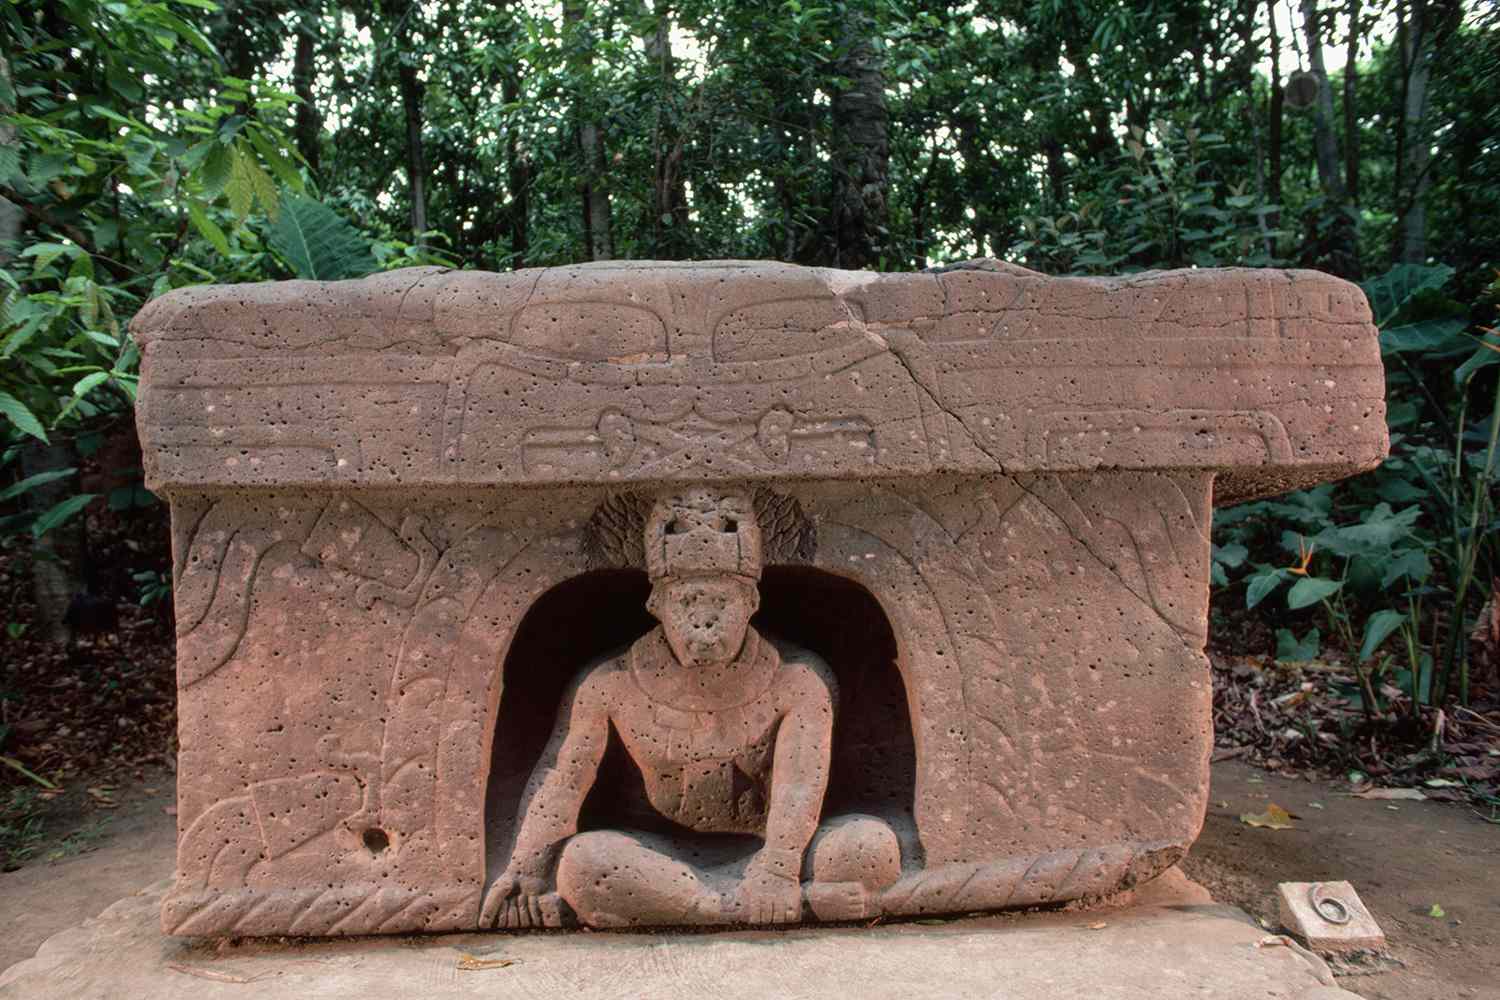 10 Facts About the Ancient Olmec in Mesoamerica